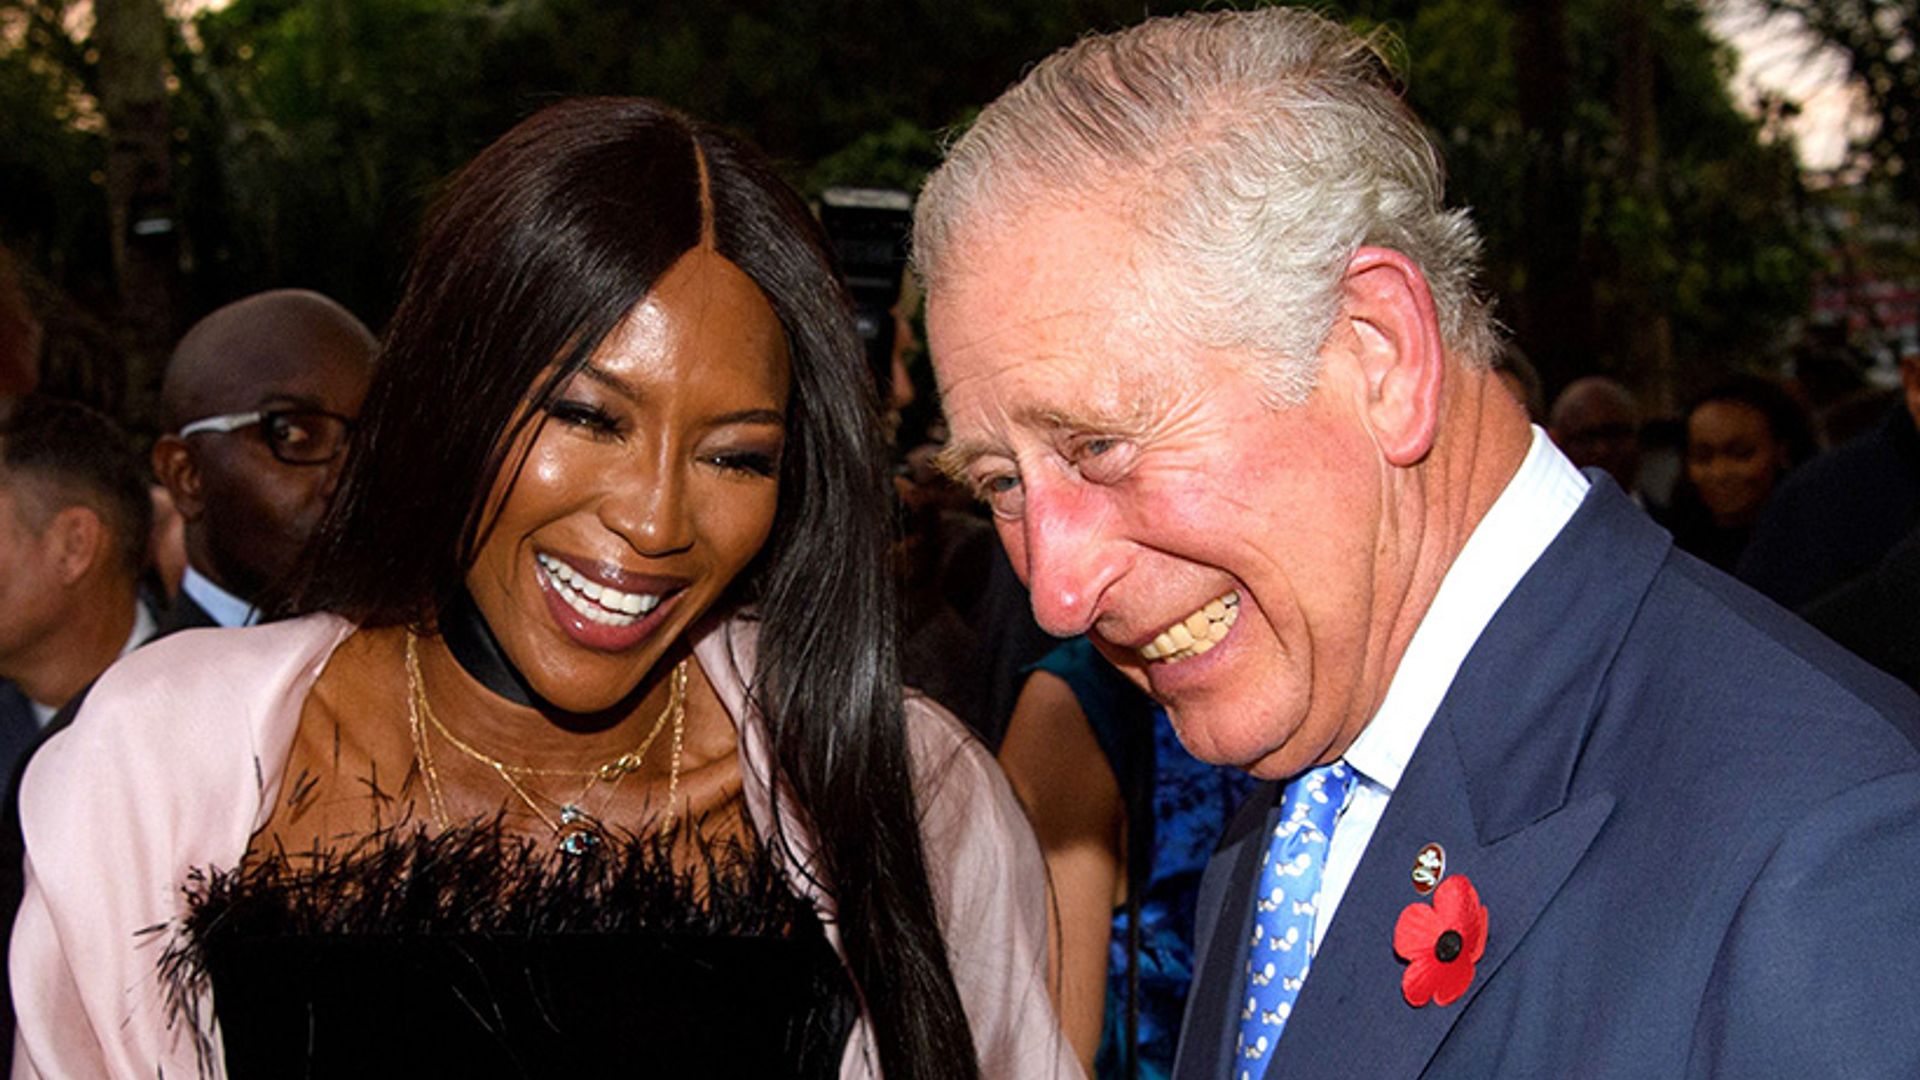 Naomi Campbell is glamorous in Ralph & Russo as she mingles with Prince Charles